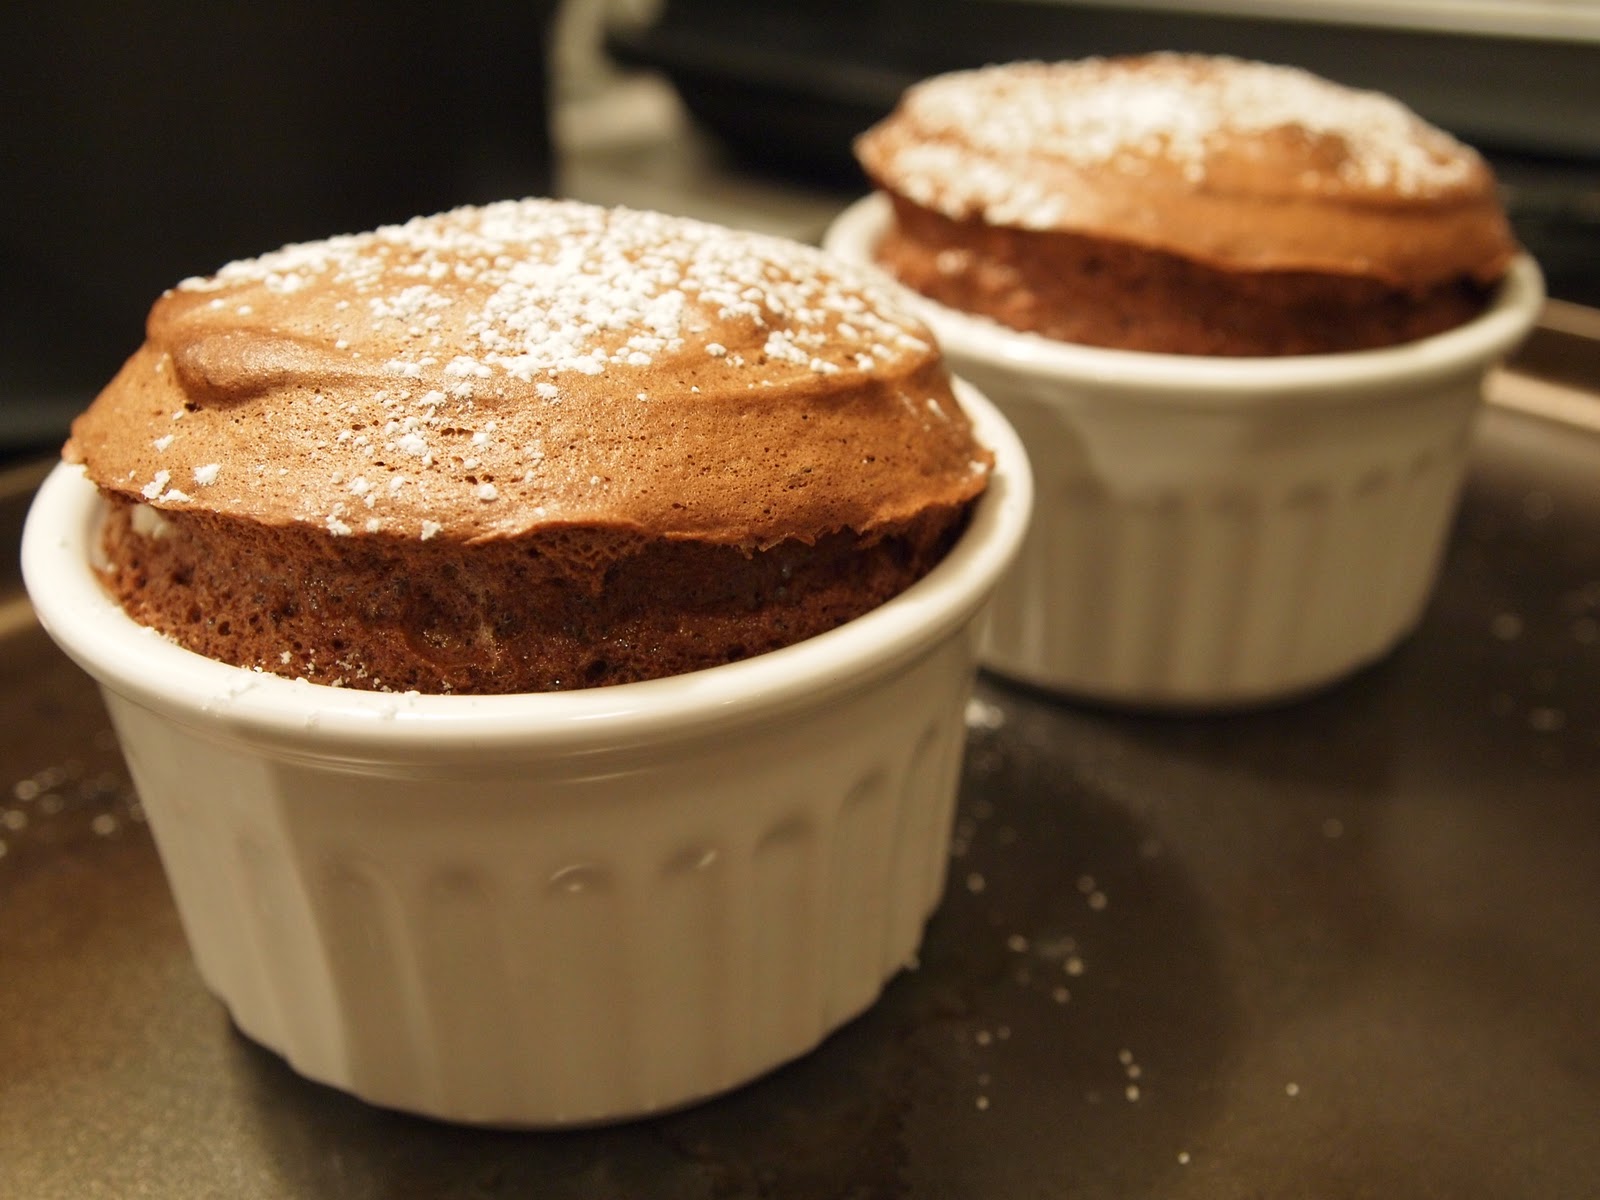 Baking is the New Black Chocolate Soufflé